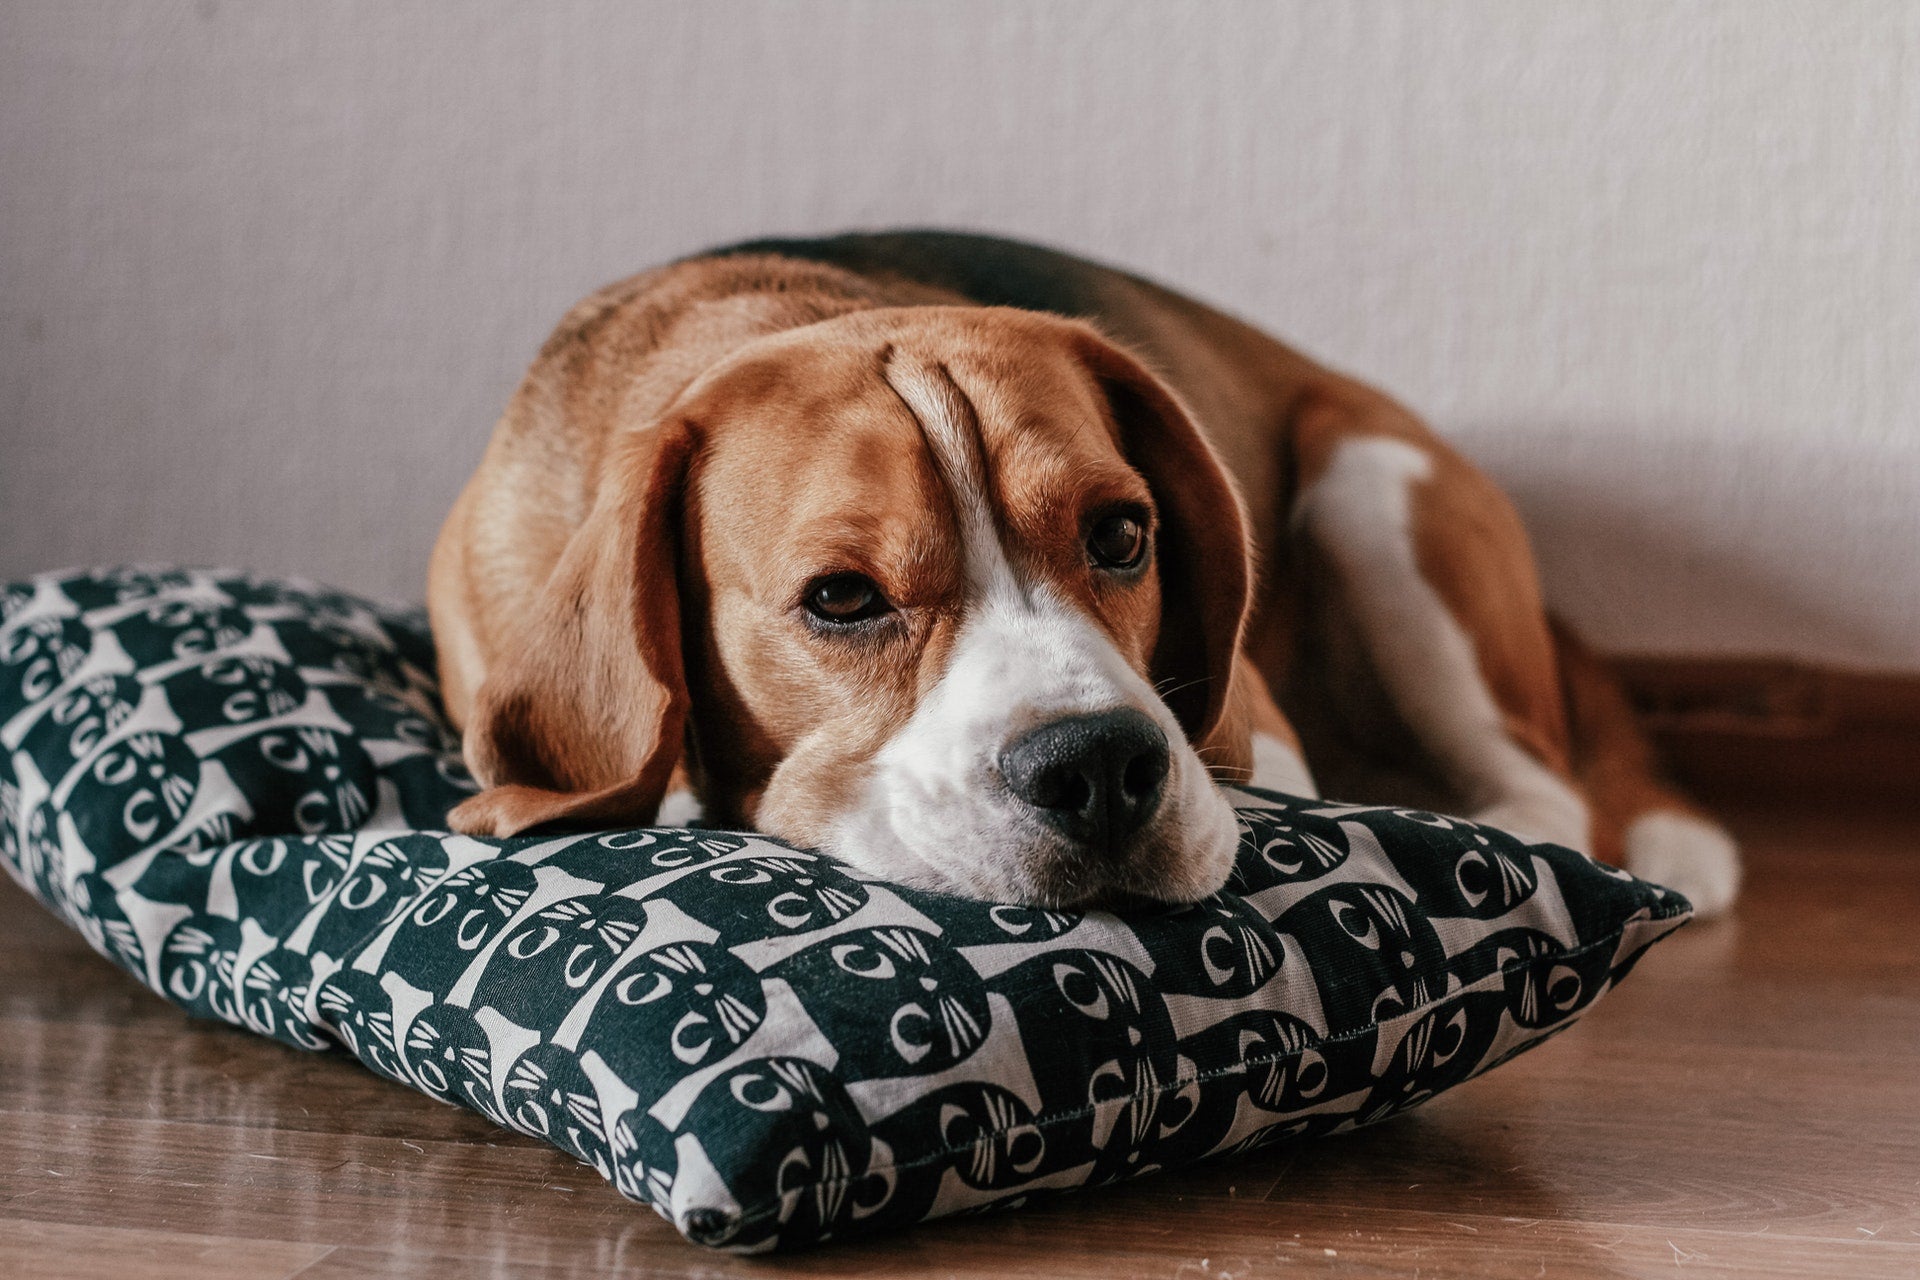 At-Home Tips for Keeping Your Pets Busy and Engaged